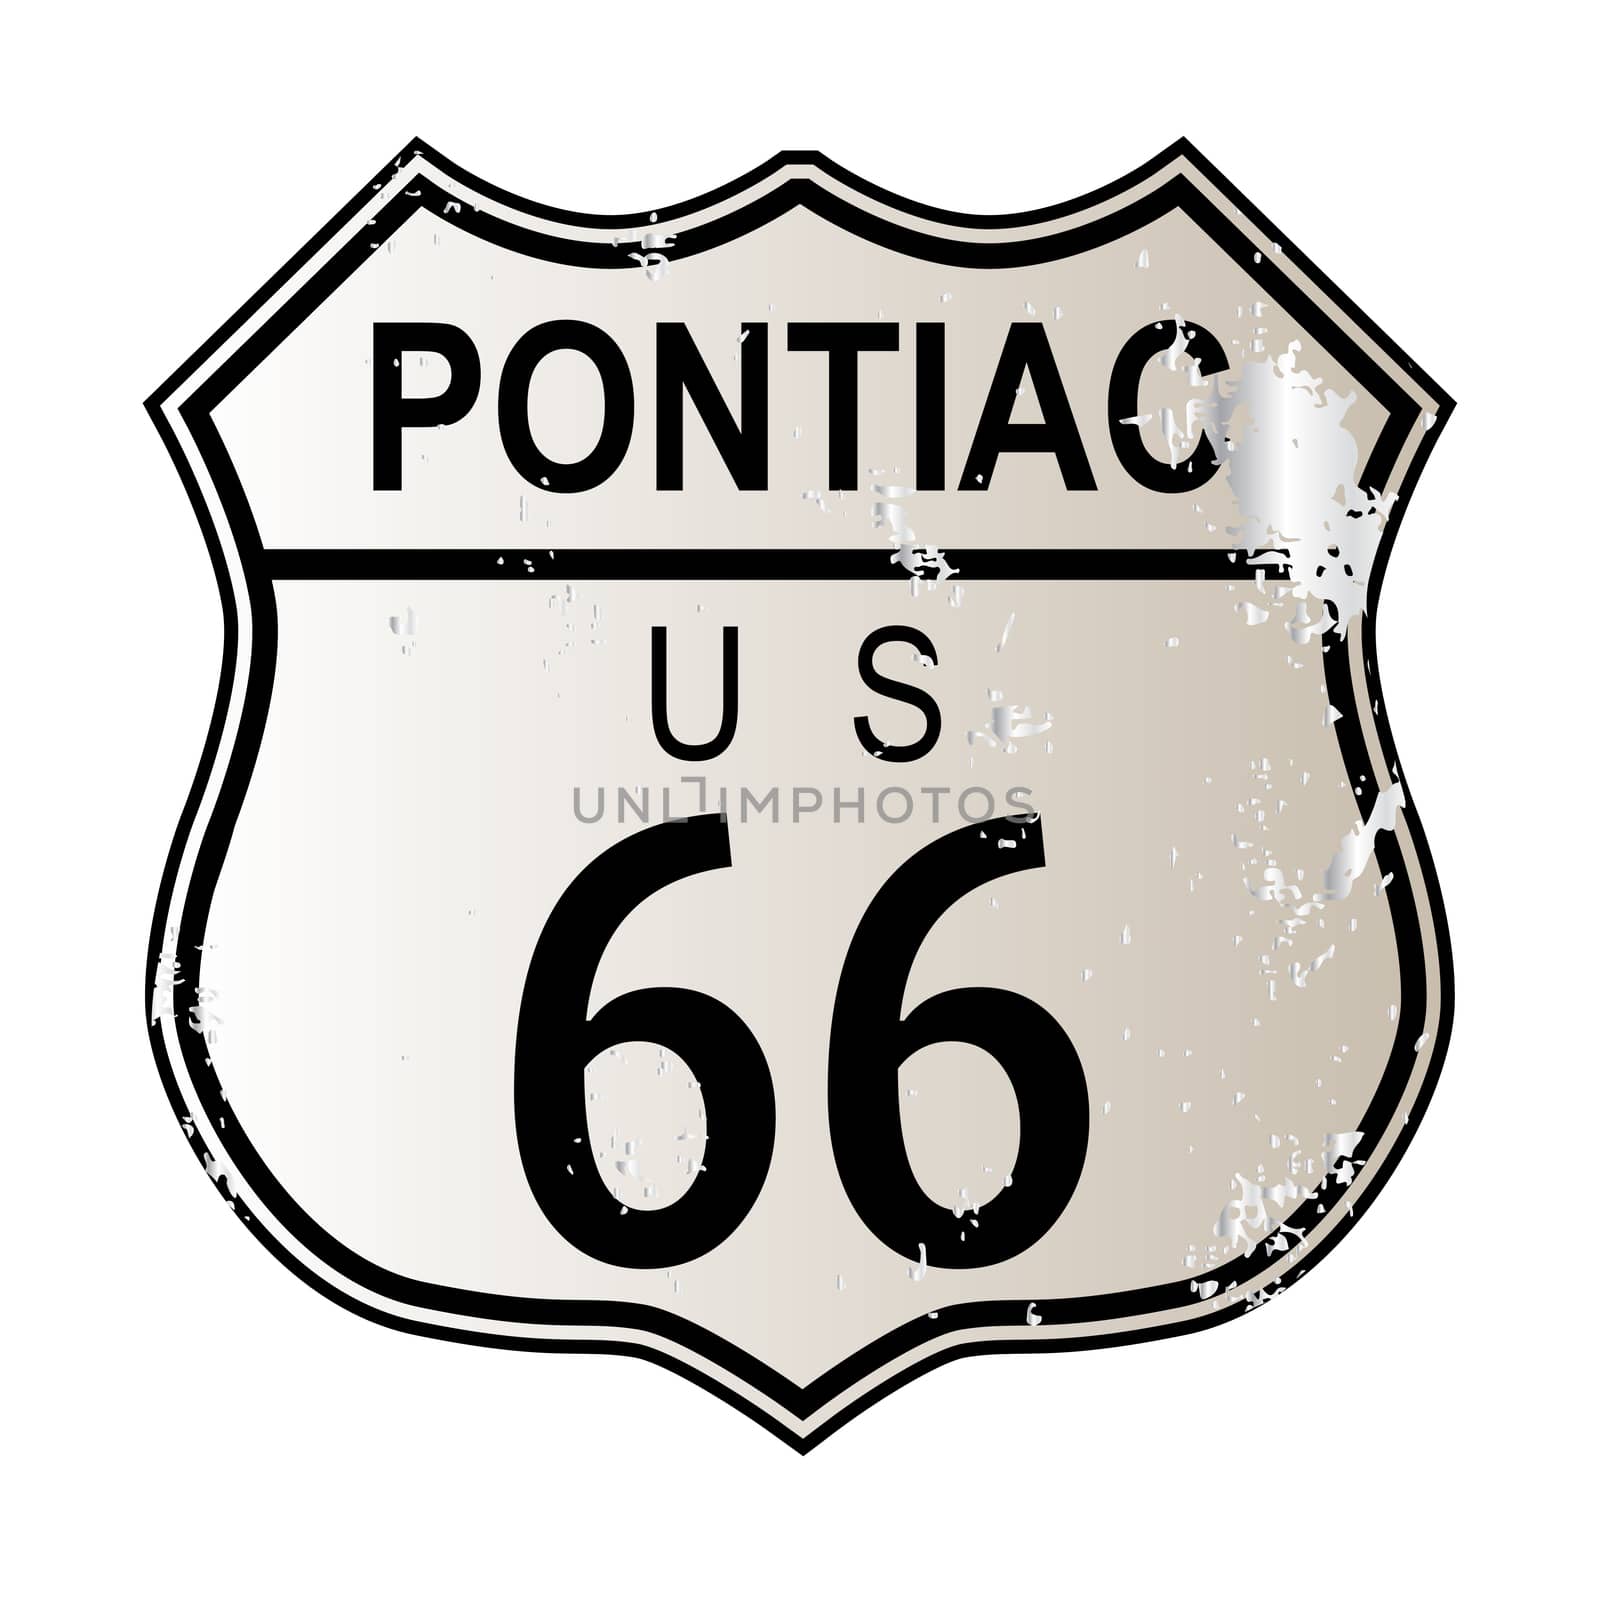 Pontiac Route 66 traffic sign over a white background and the legend ROUTE US 66